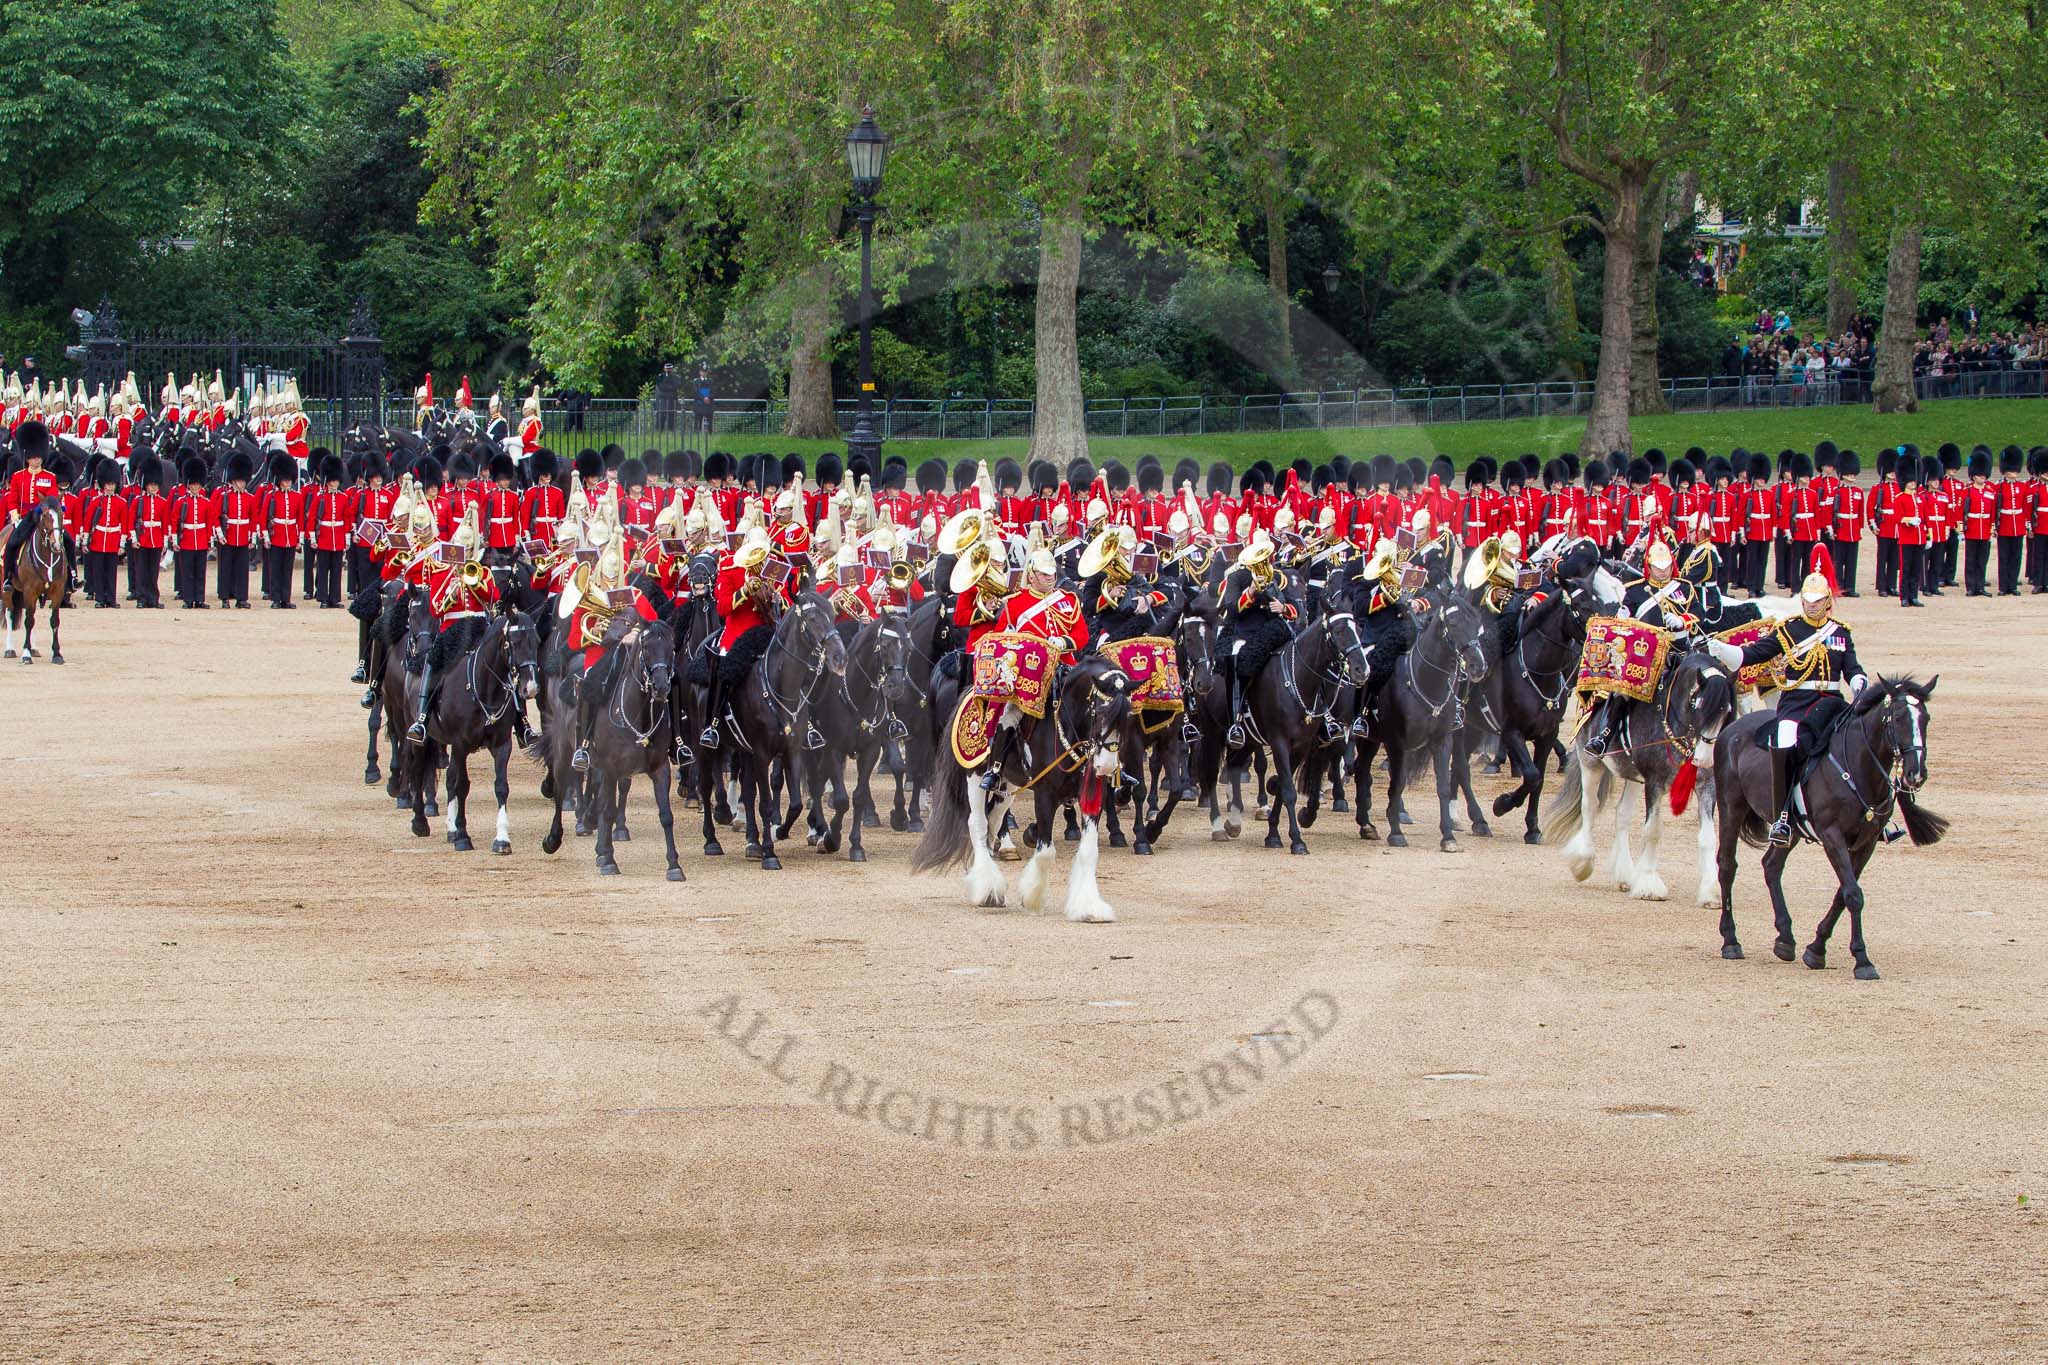 The Colonel's Review 2012: The Mounted Bands of the Household Cavalry have changed direction and are now riding towards HW The Queen..
Horse Guards Parade, Westminster,
London SW1,

United Kingdom,
on 09 June 2012 at 11:51, image #388